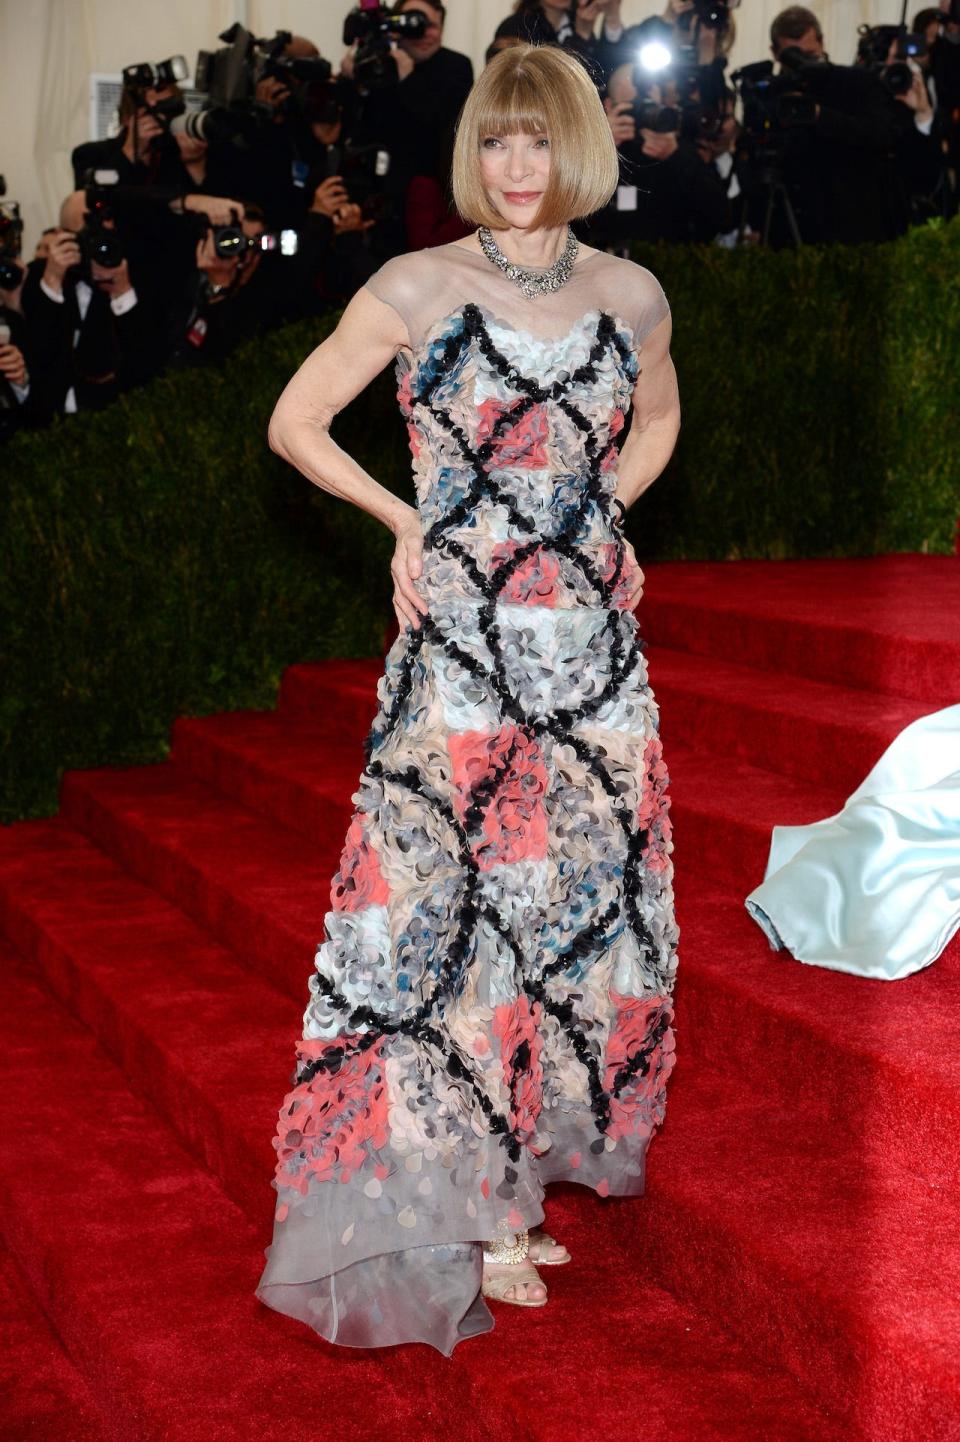 Anna Wintour at the 2014 Met Gala.